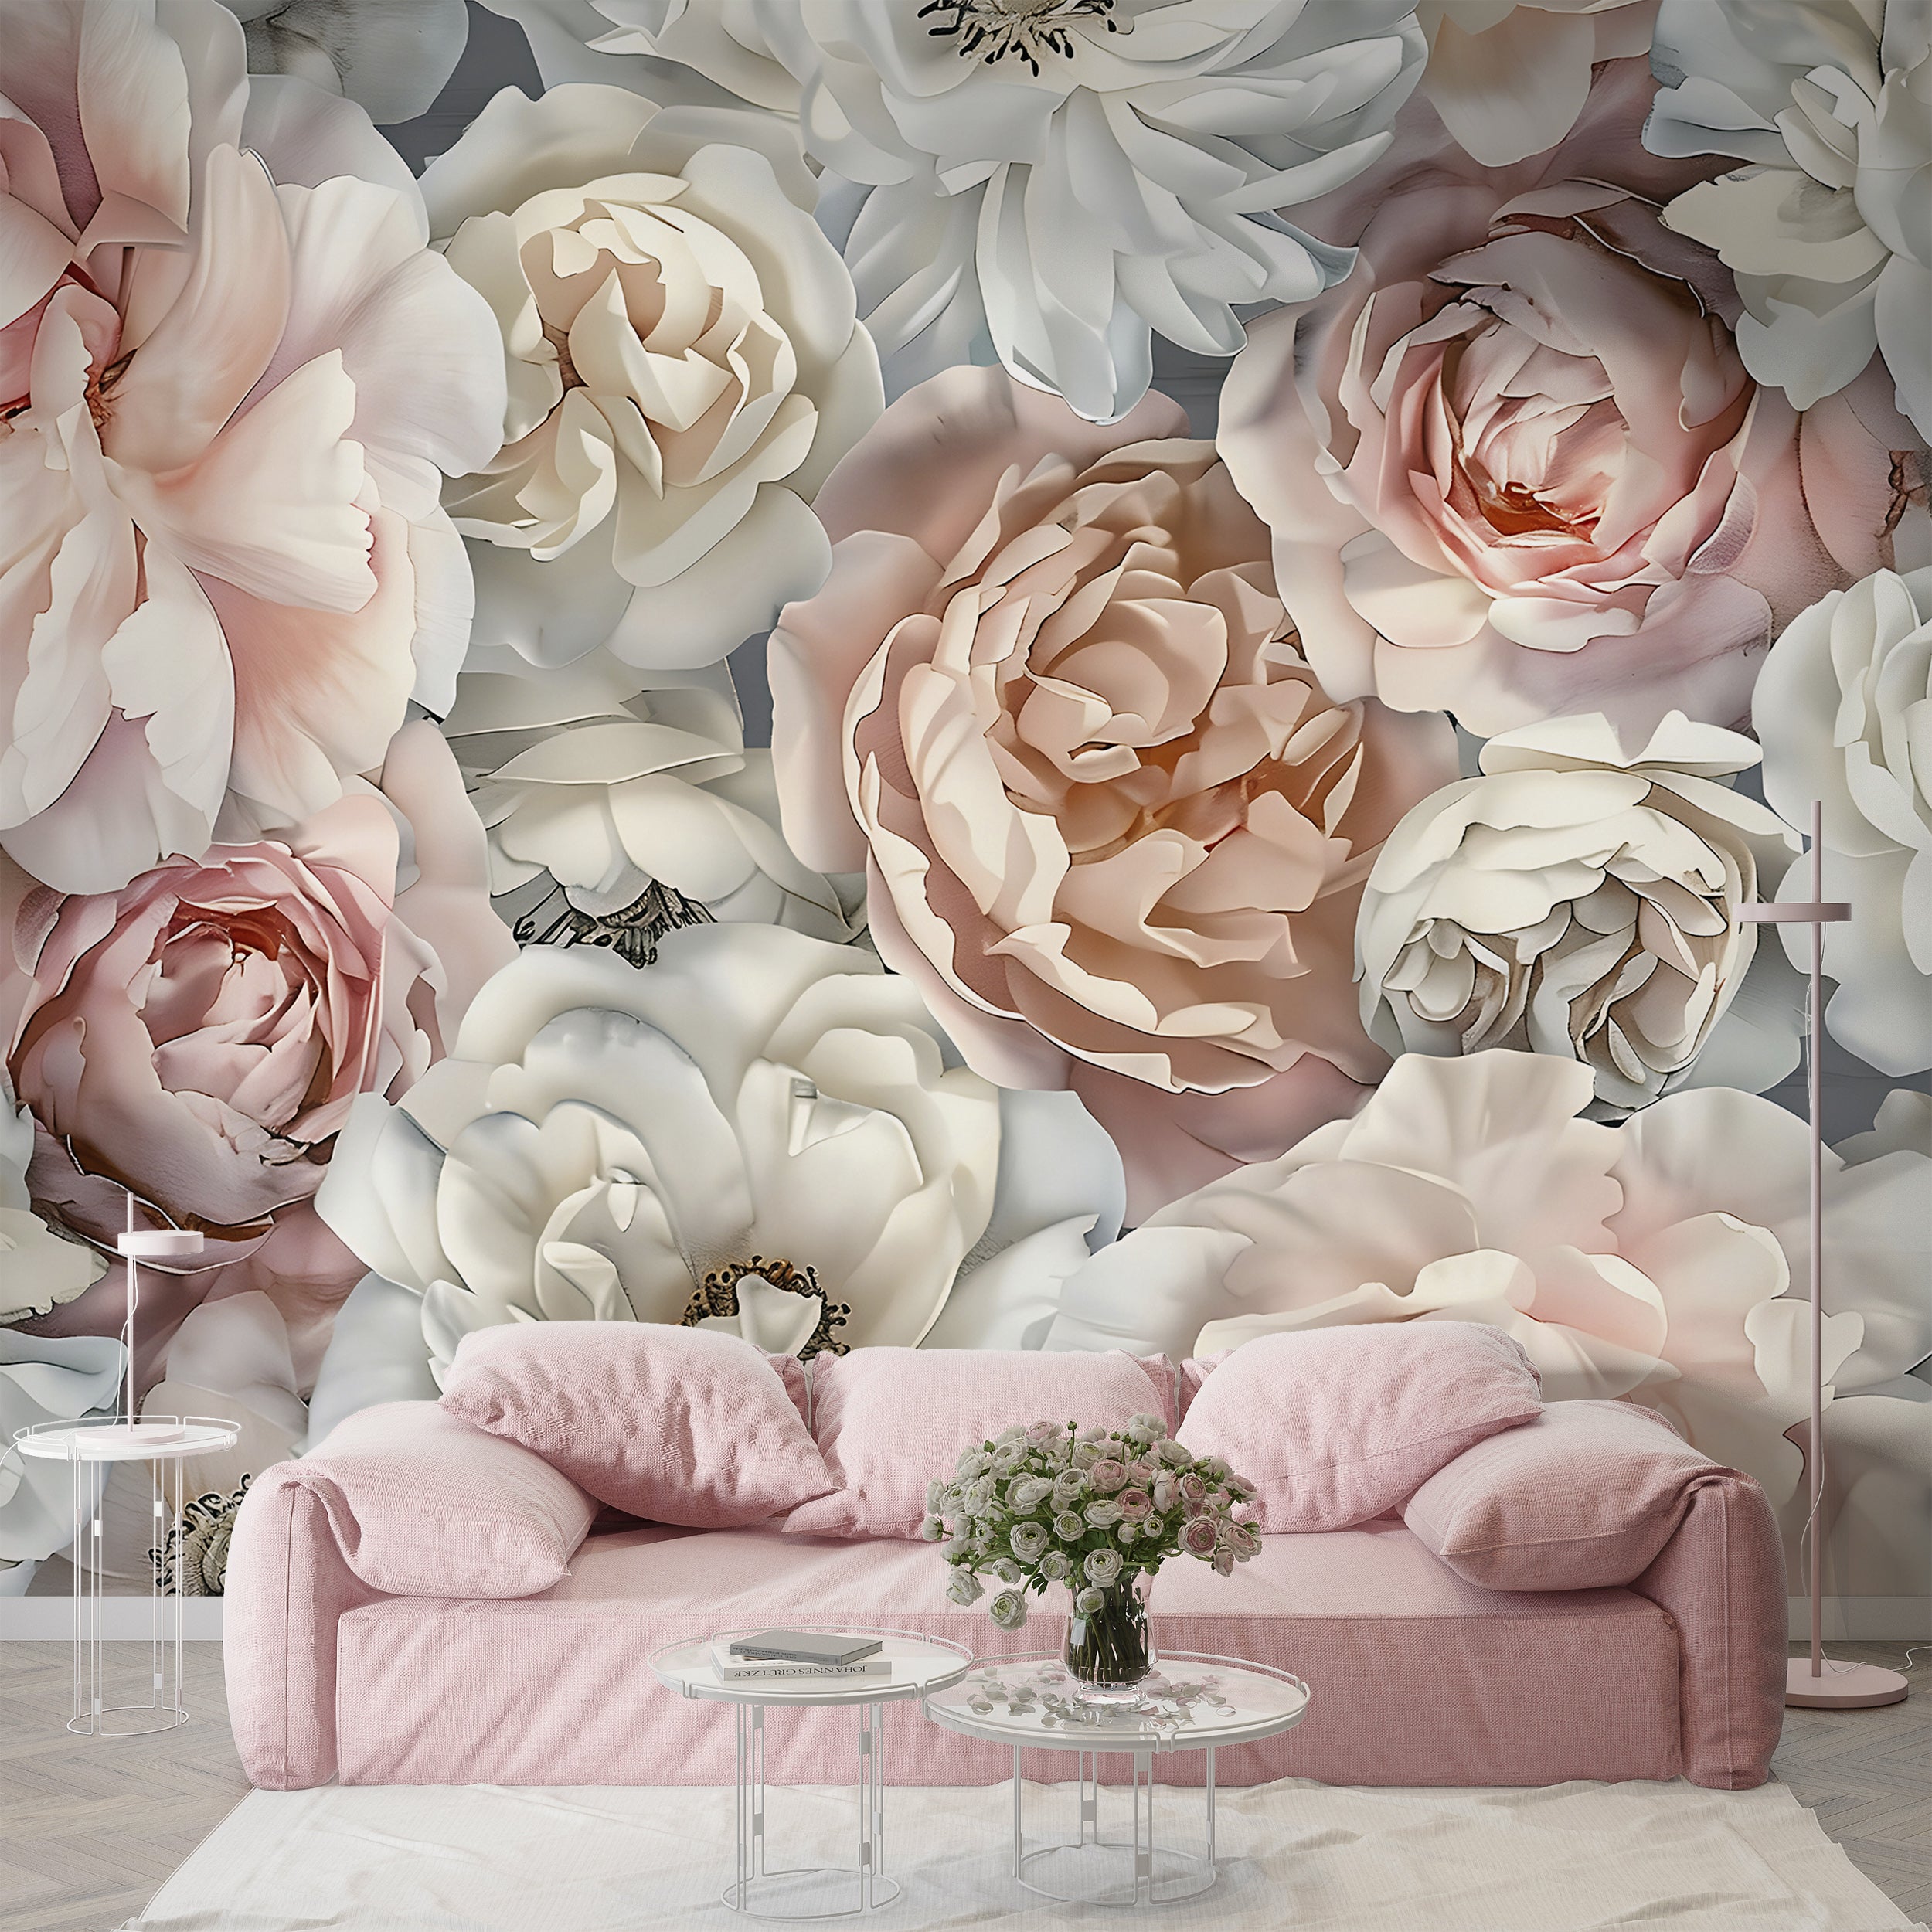 Large Peonies Wall Mural, Watercolor Pastel Pink and White Floral Wallpaper, Removable Peony Wall Decor, Unique Custom Size Botanical Art